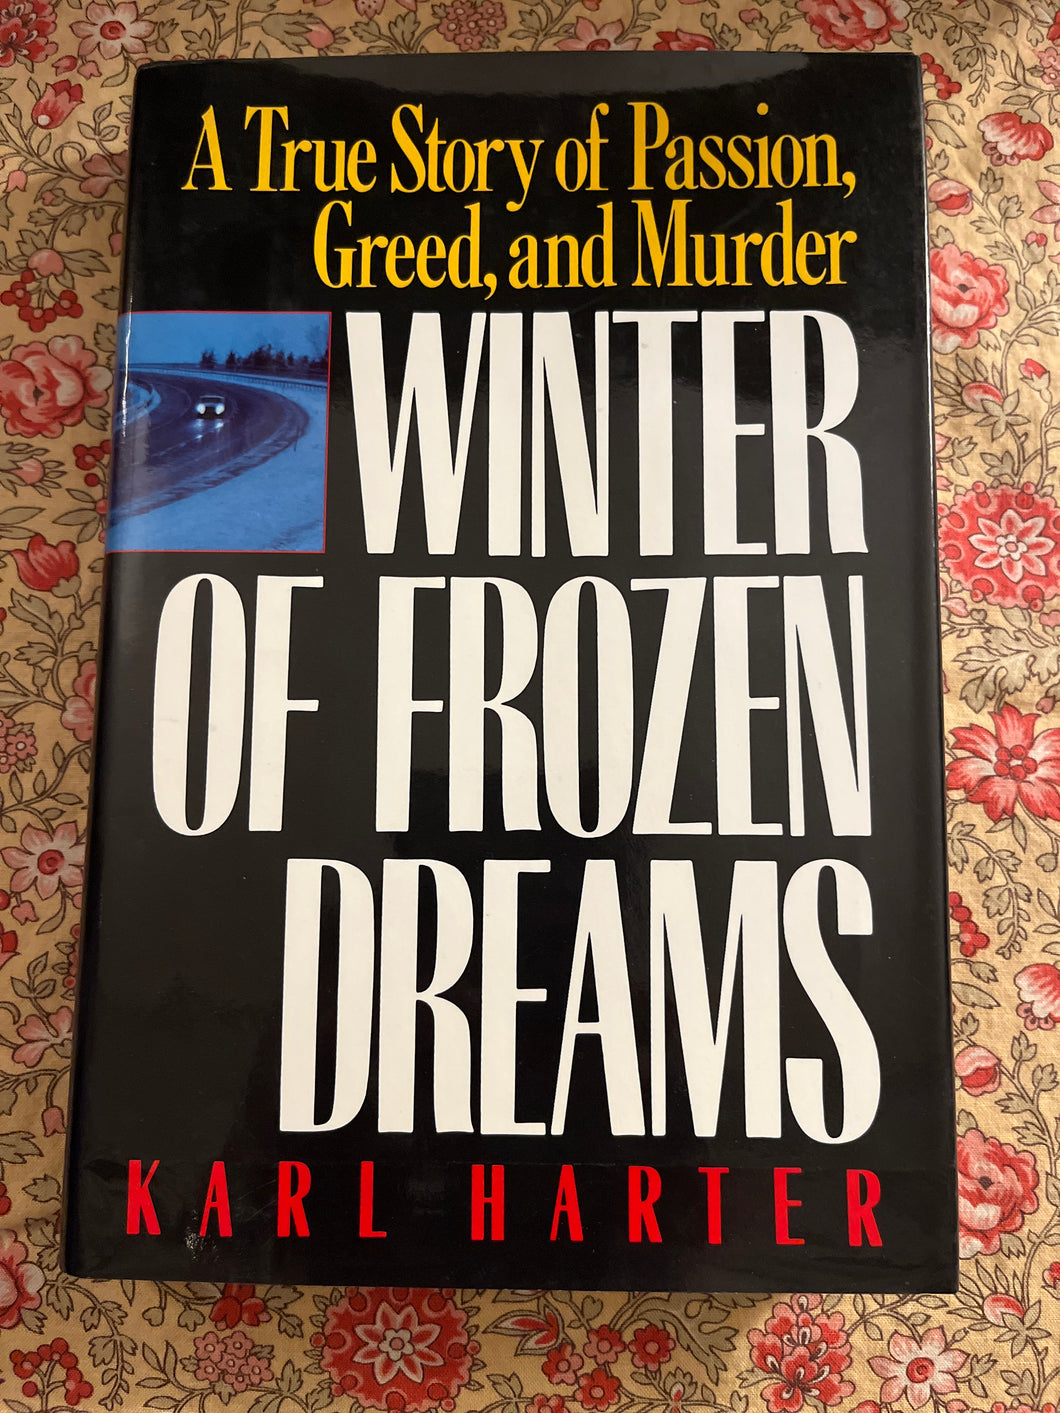 Winter of Frozen Dreams: A True Story of Passion, Greed and Murder